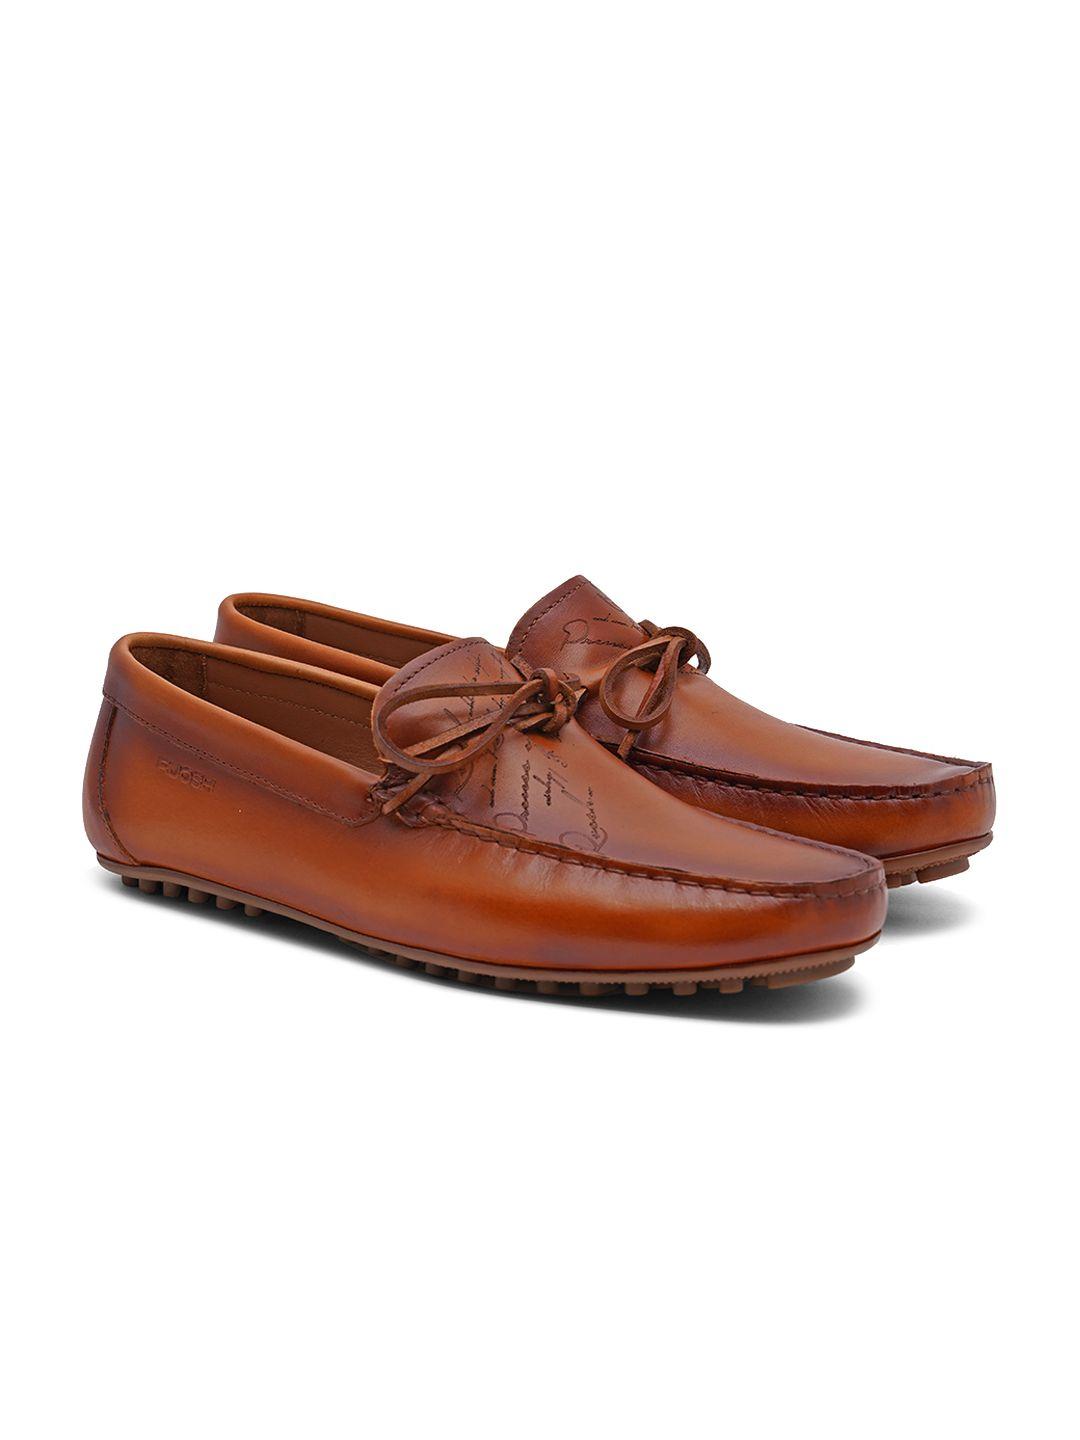 ruosh-men-tan-brown-leather-loafers